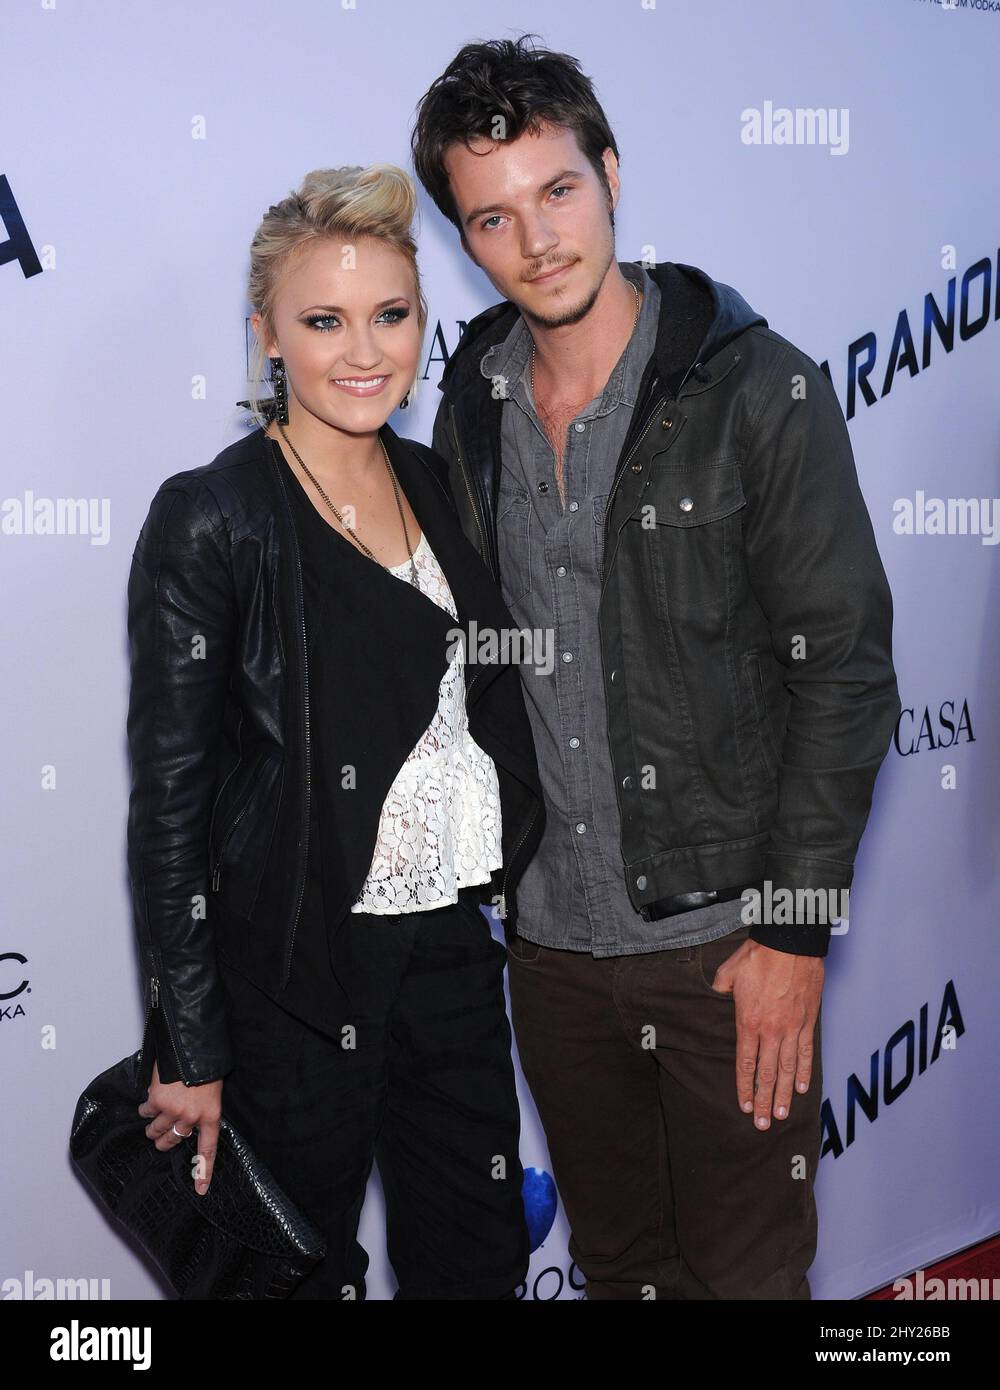 Emily Osment & Nathan Keyes attends the 'Paranoia' US premiere held at the Directors Guild of America, Los Angeles. Stock Photo